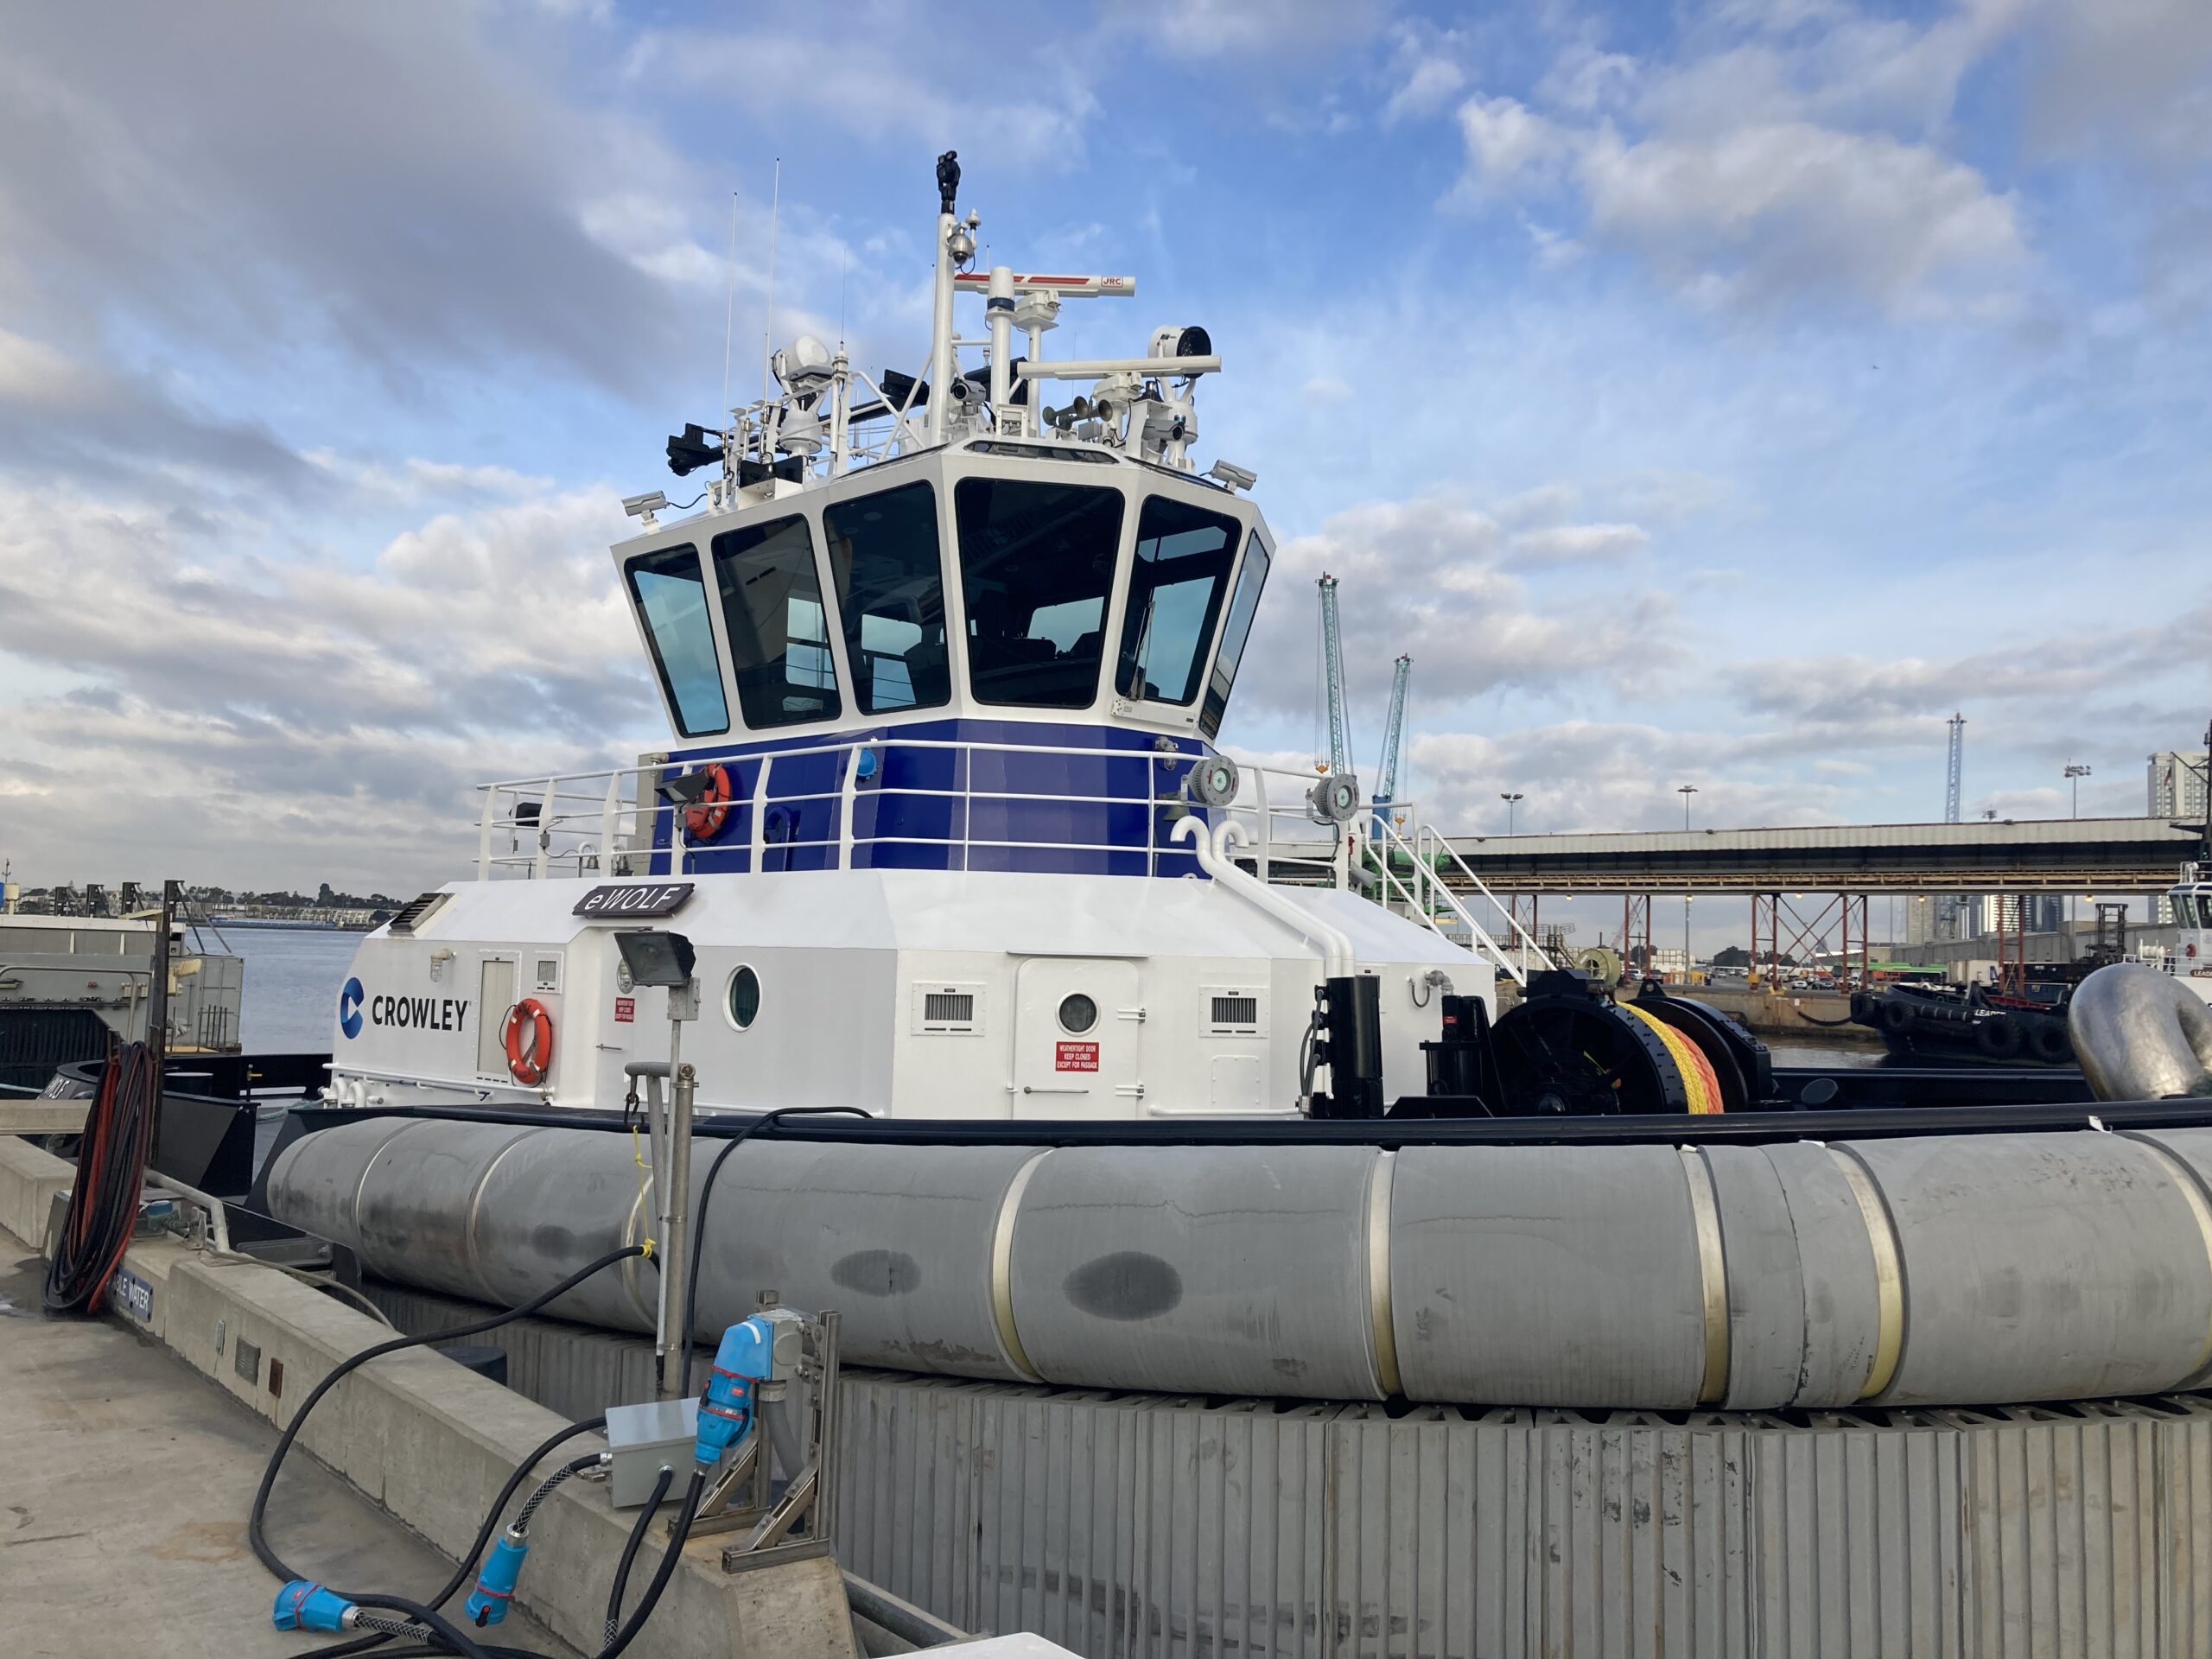 New Electric Tugboat Unveiled At Port Of San Diego [Video]